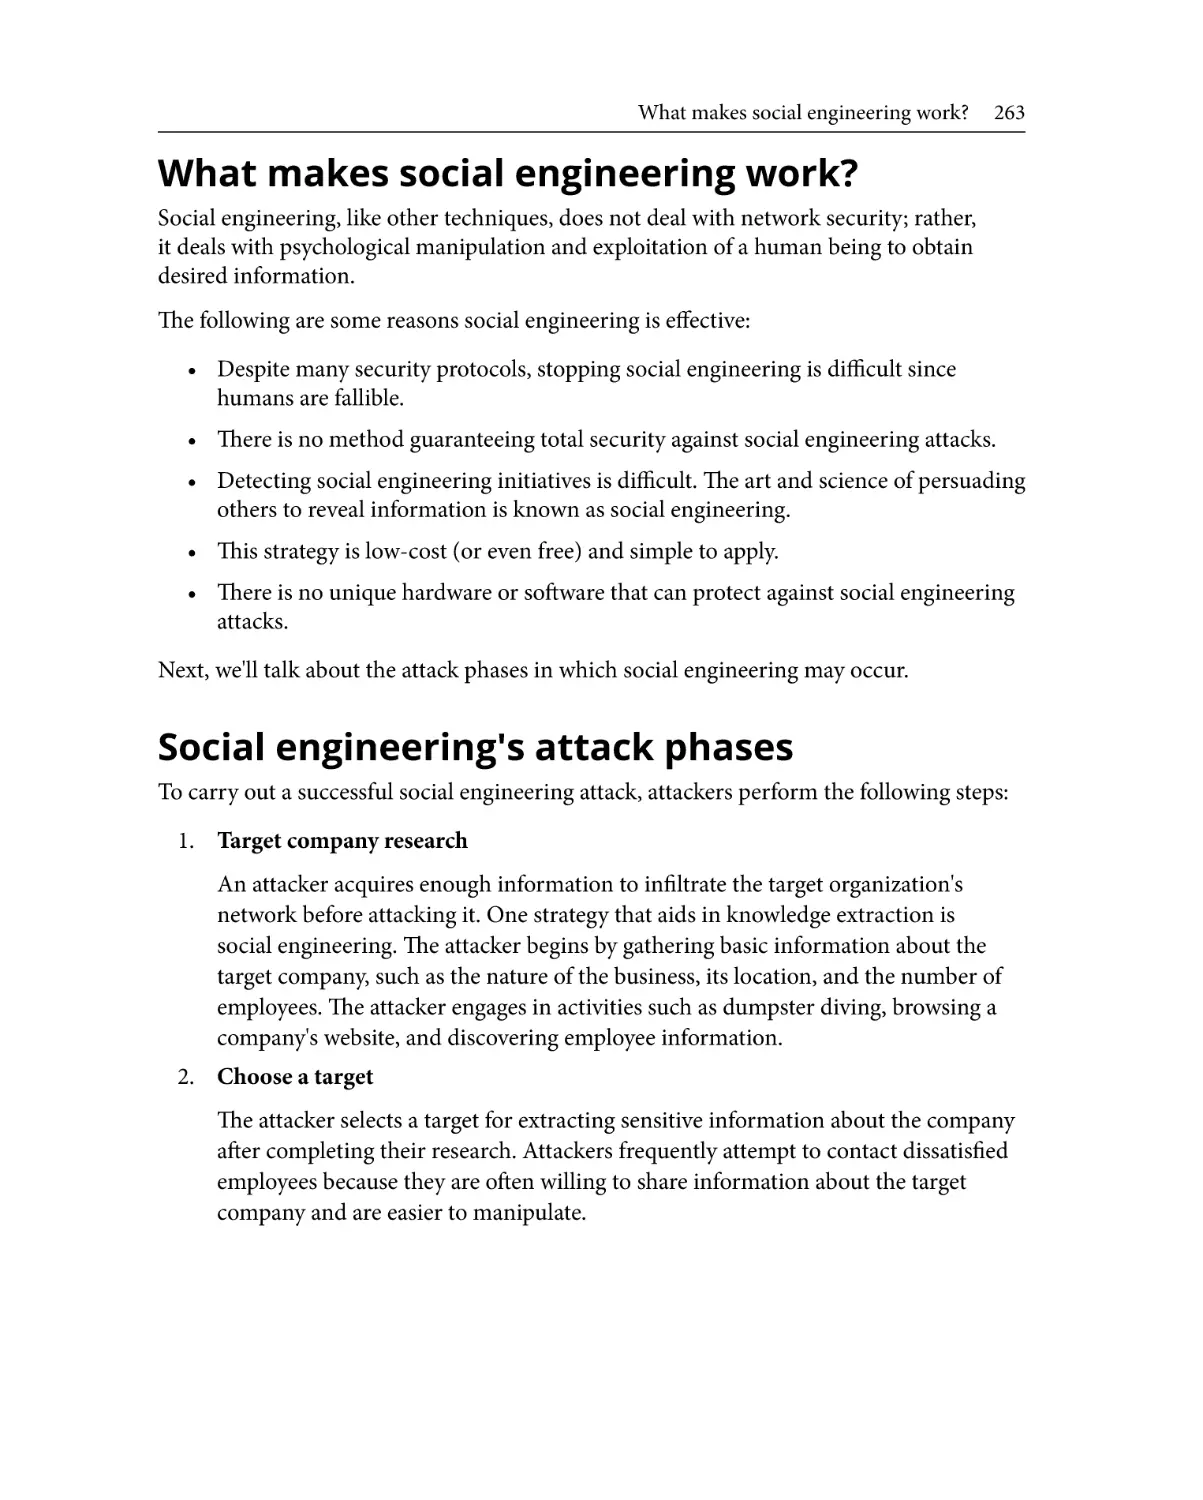 What makes social engineering work?
Social engineering's attack phases